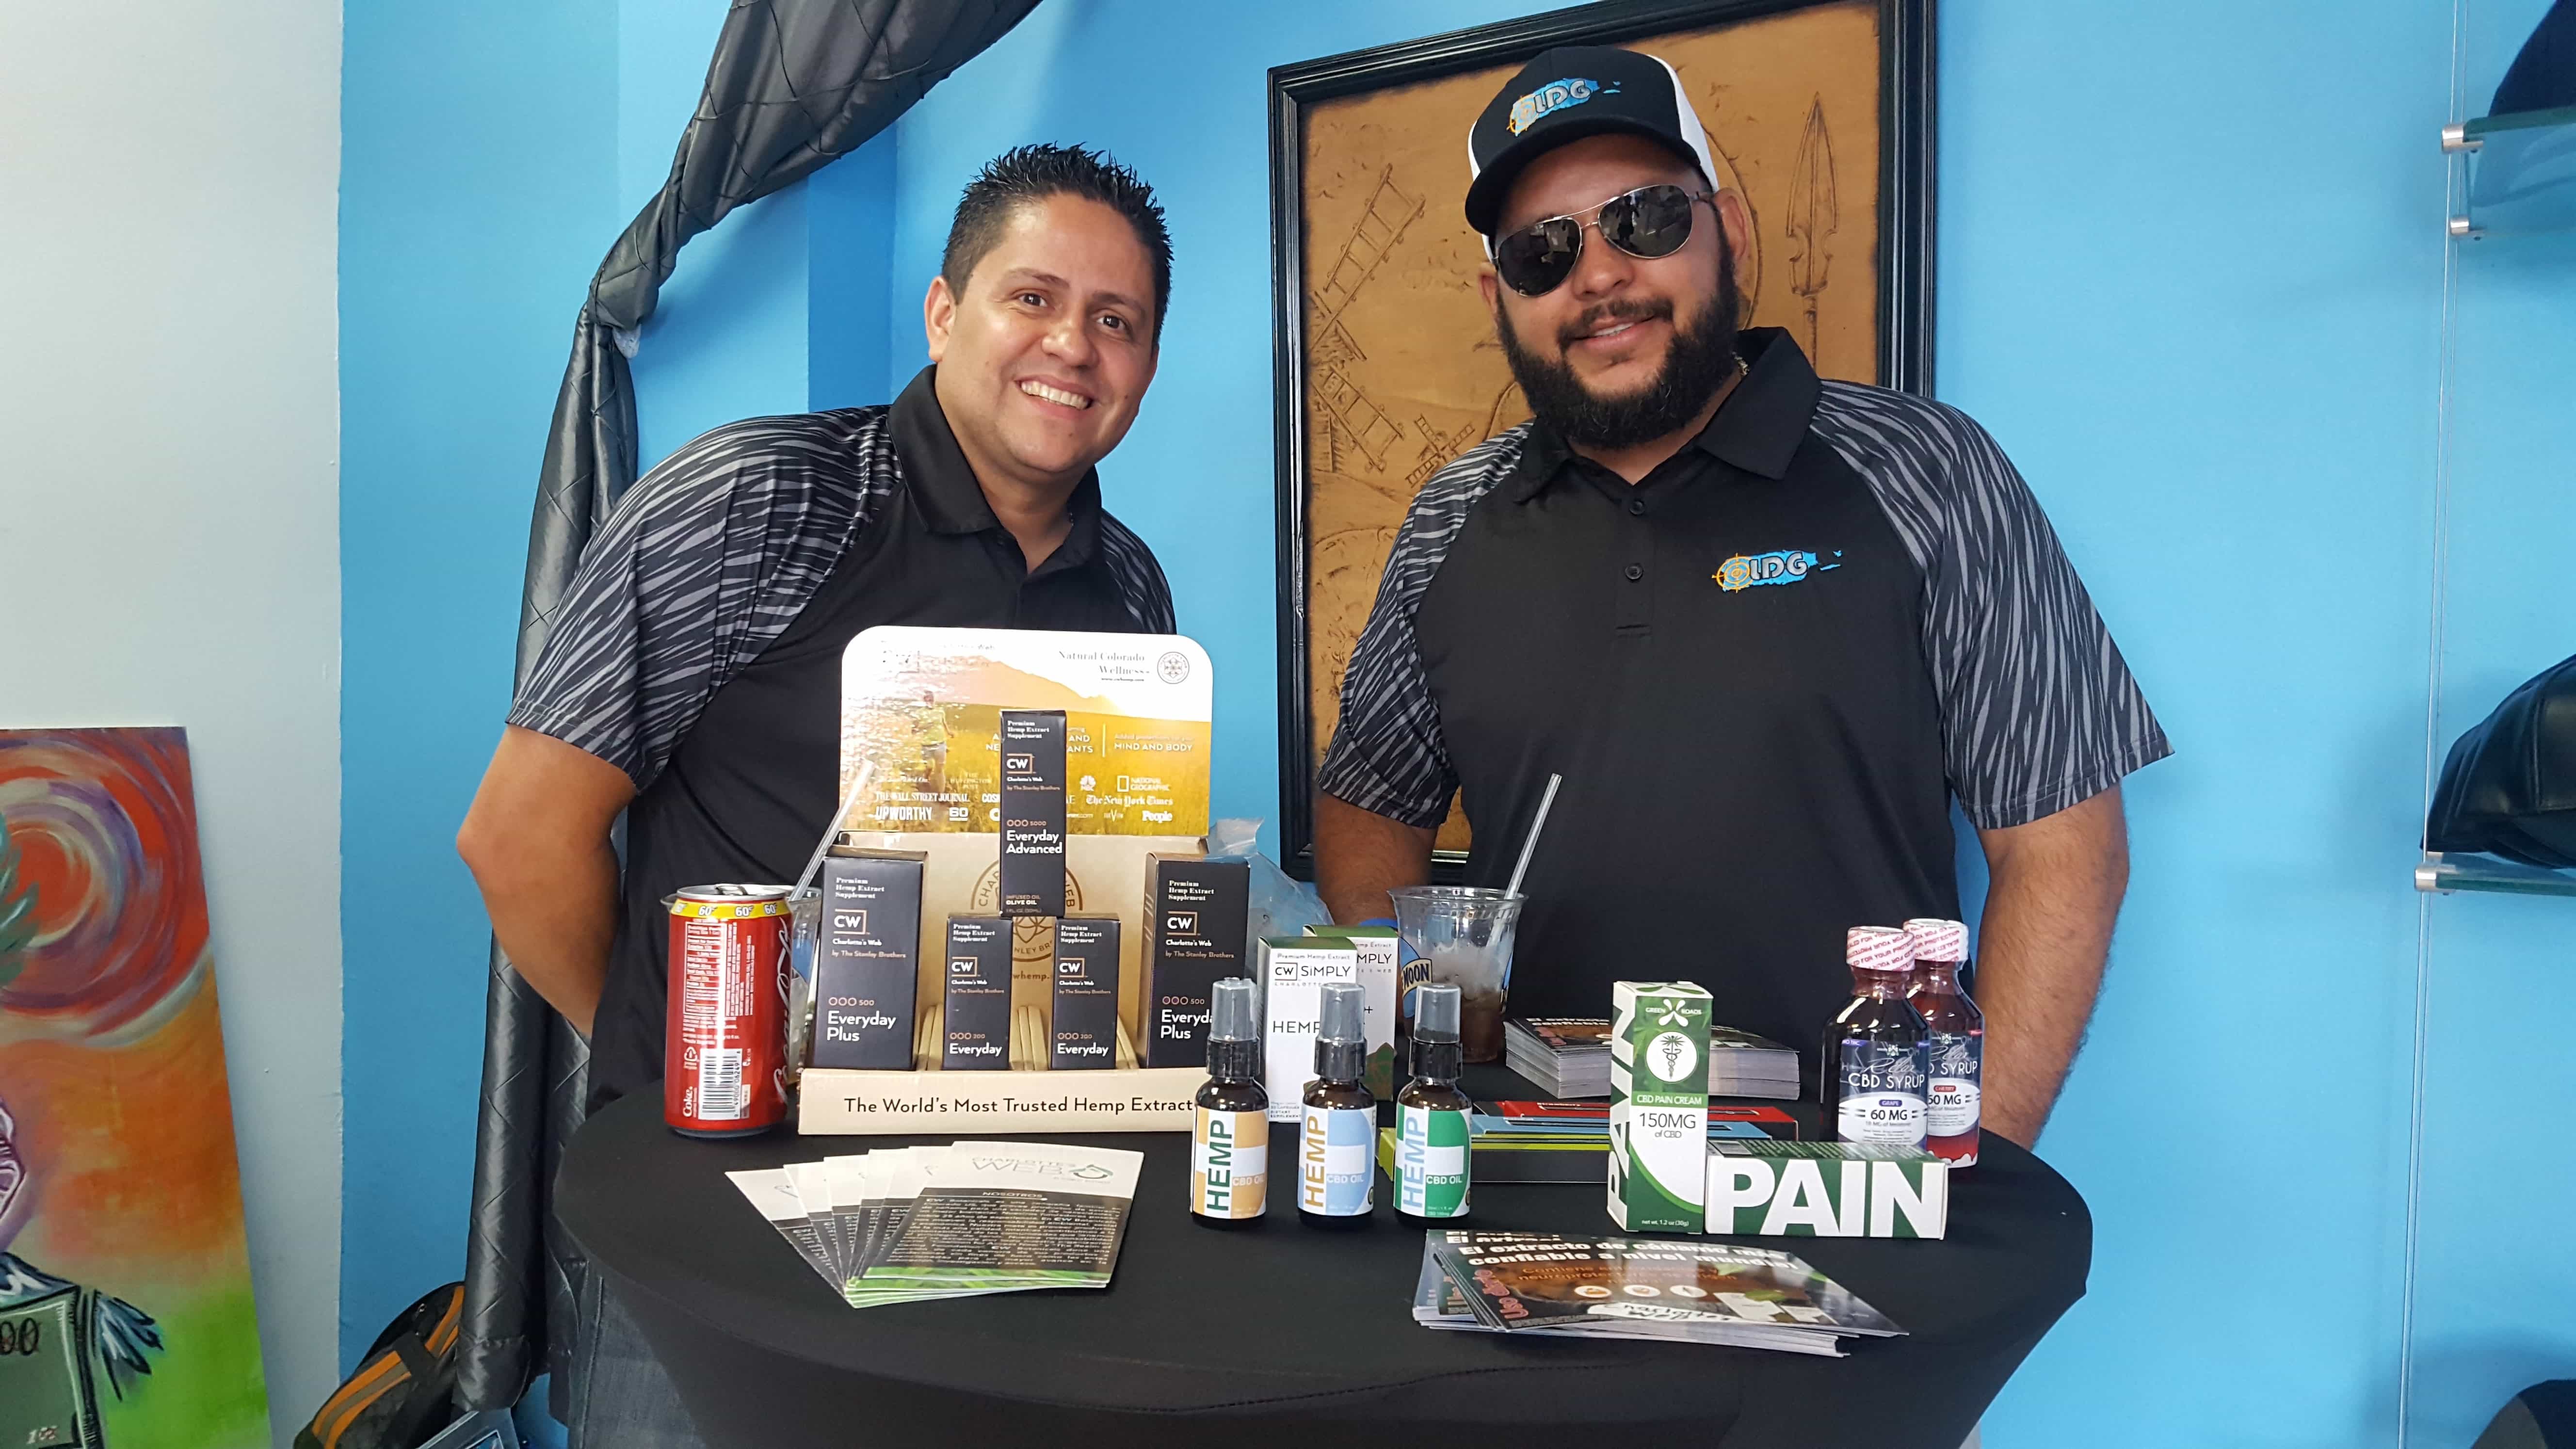 Representatives for a CBD company promoting their products in Mayagüez. (Photo courtesy of Vive Boriken and D’Lab)